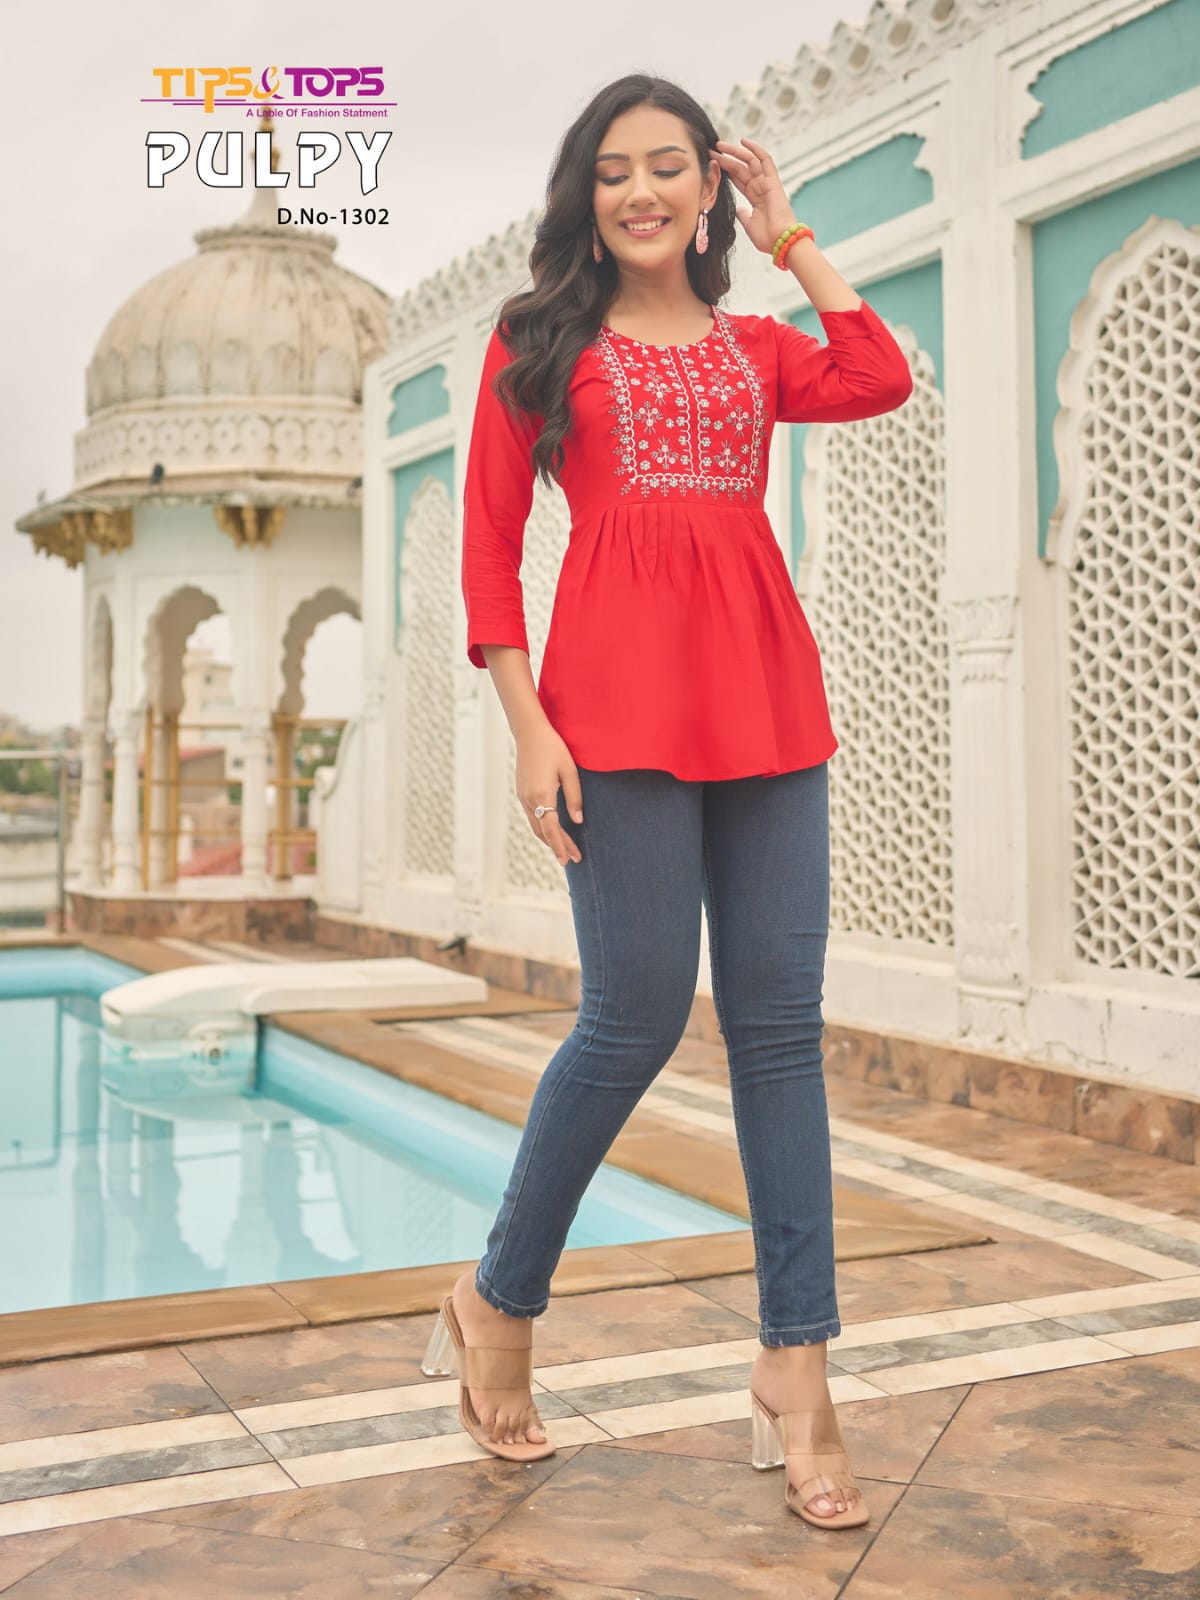 Tips Tops Pulpy Vol 13 Ladies Tops Catalog collection 2